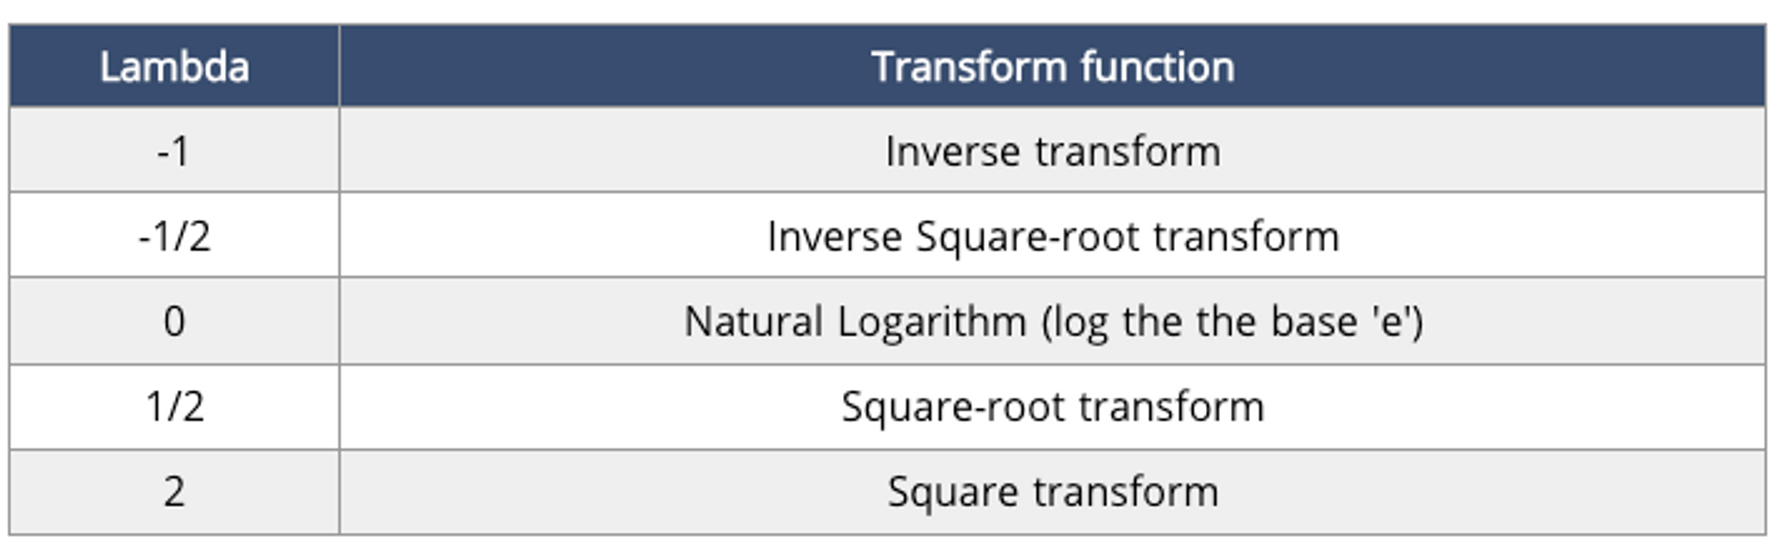 Table showing lambda values and corresponding transformation functions.